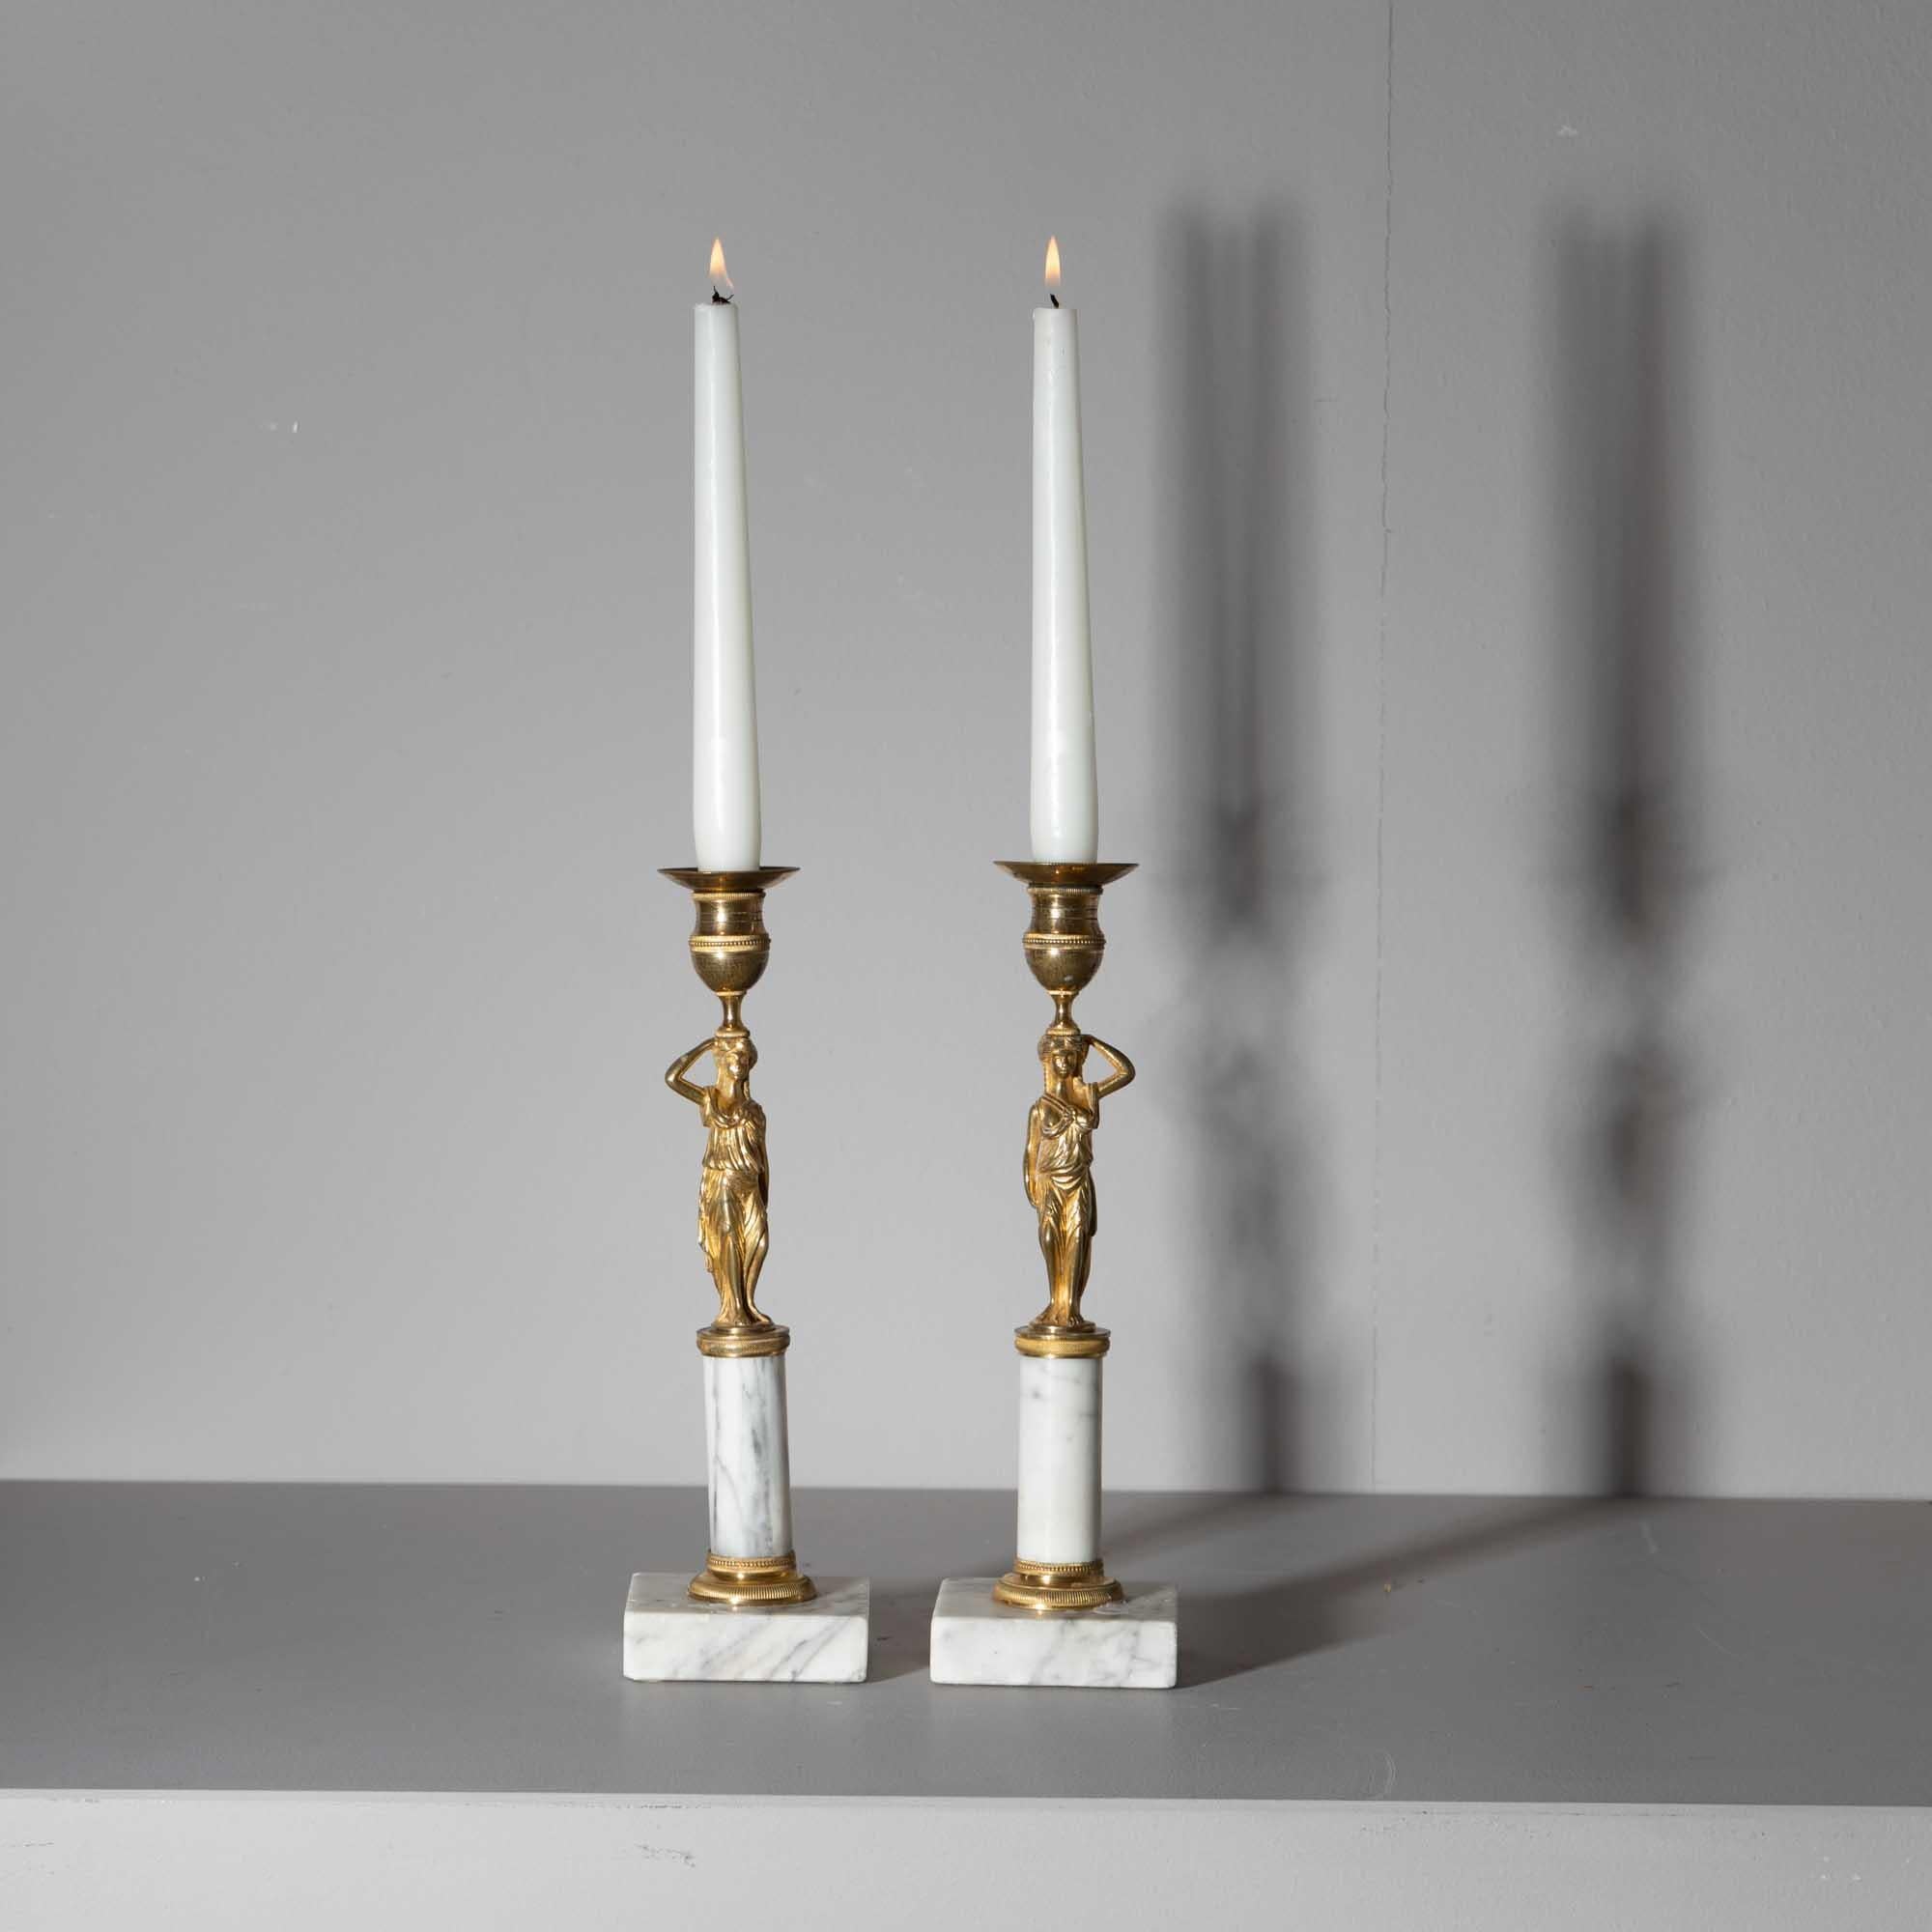 Pair of Empire candlesticks with bronze karyatids and white marble pedestals, 
crafted by Werner & Mieth in Berlin during the early 19th century. 